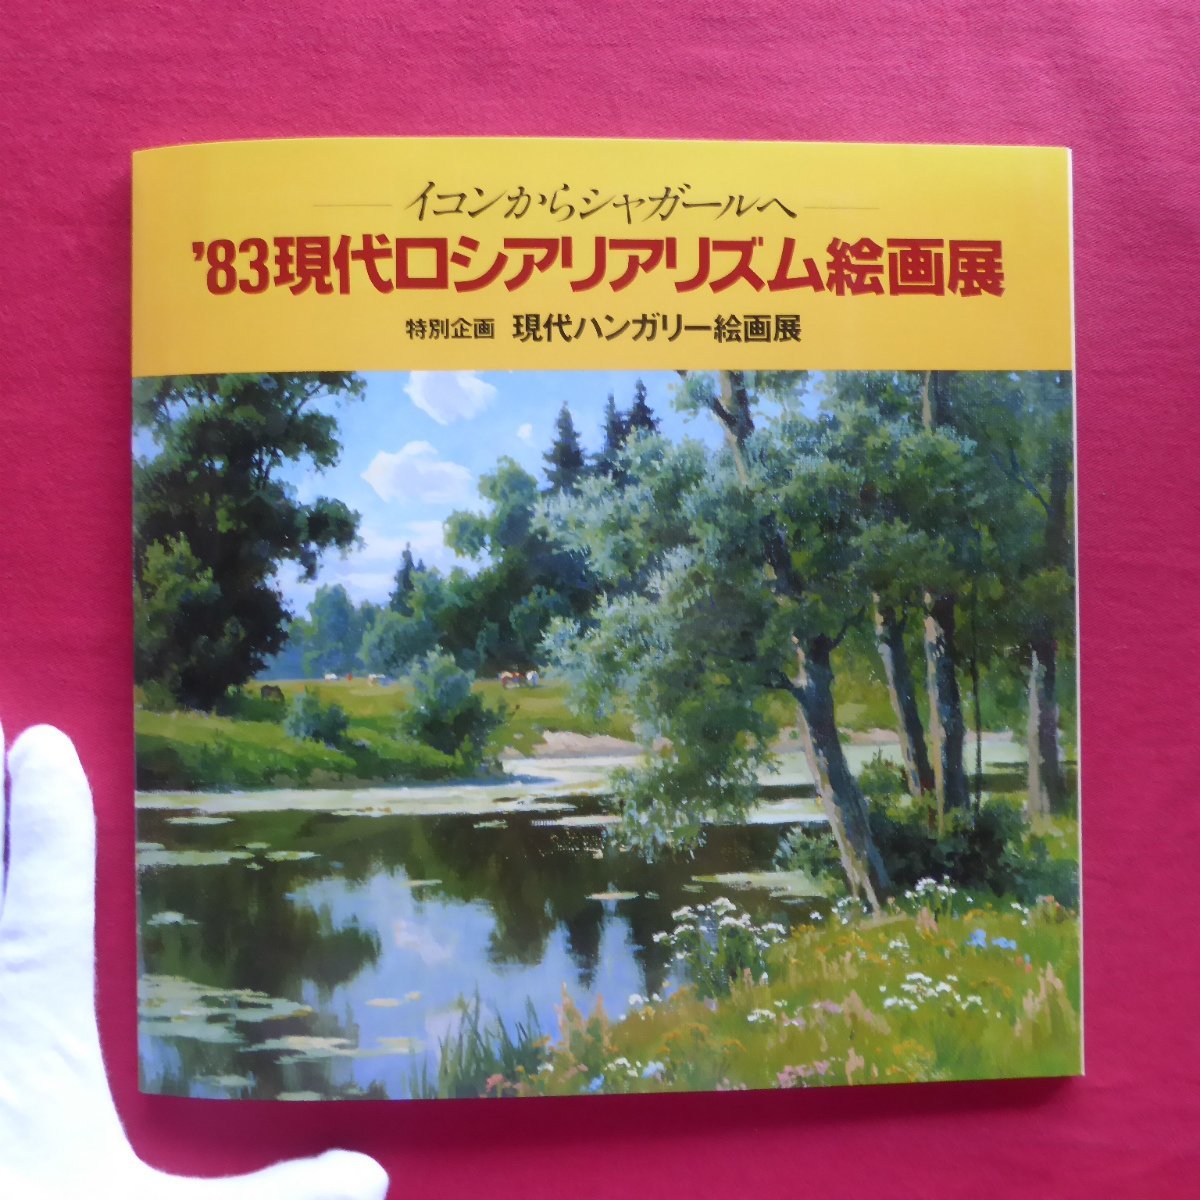 w3 Catalog [-From Icons to Chagall-'83 Contemporary Russian Realism Painting Exhibition Special Feature: Contemporary Hungarian Painting Exhibition/Nagoya Mitsukoshi Sakae Main Store/1983], Painting, Art Book, Collection, Catalog